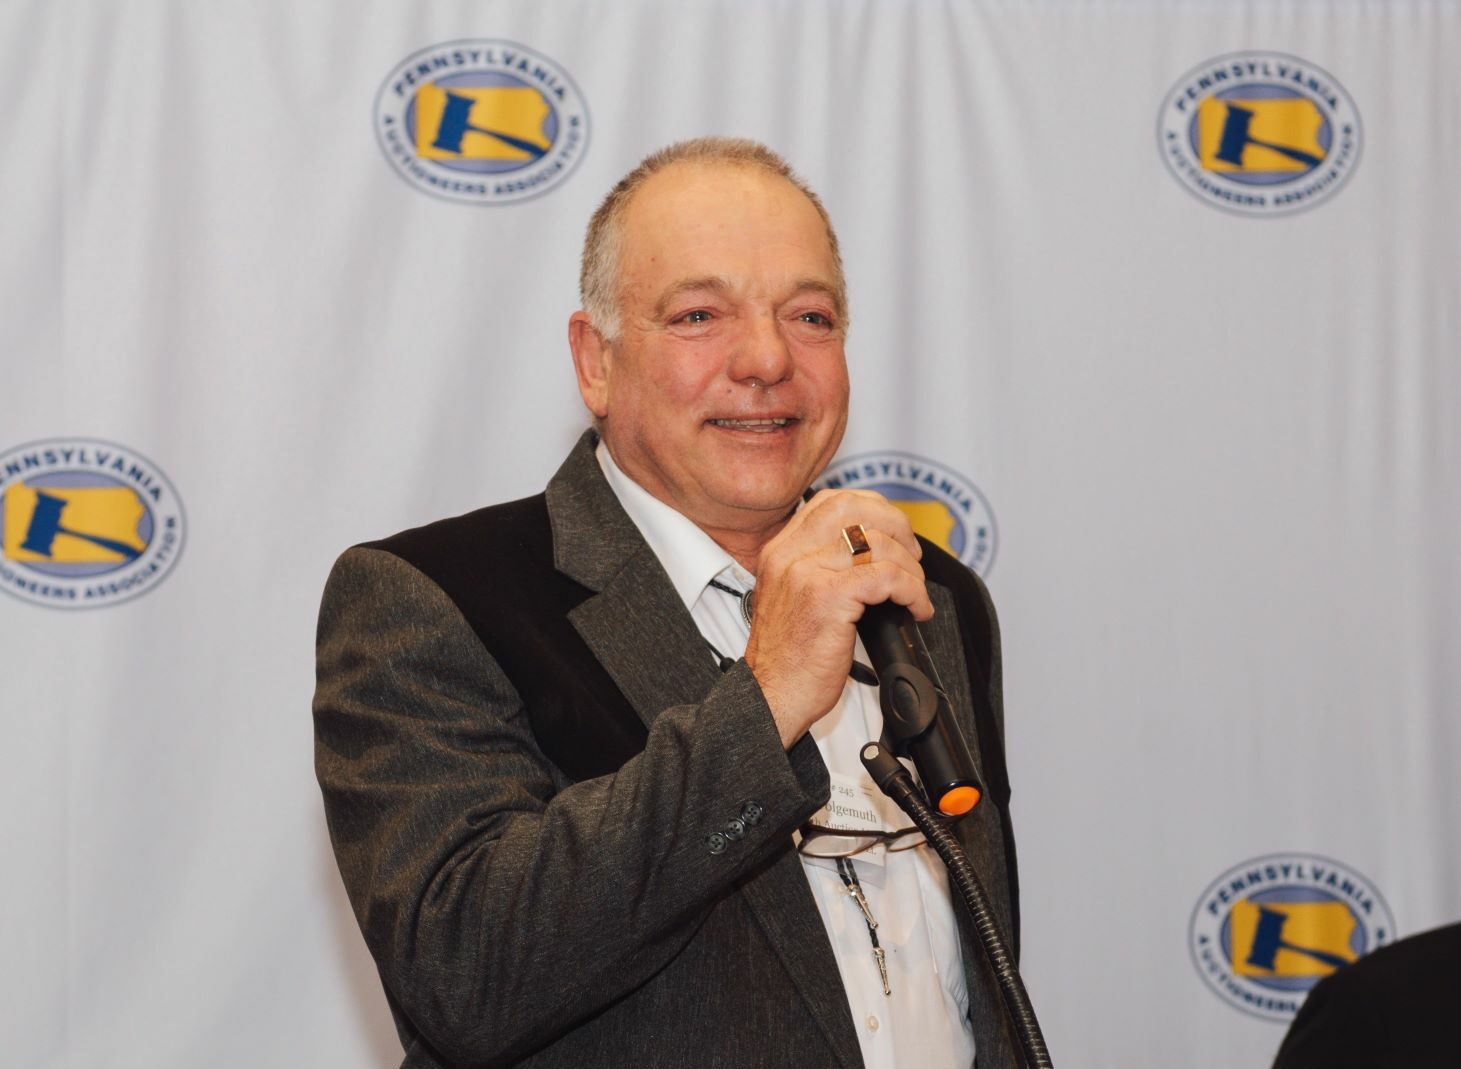 Auctioneer of the Year Dennis Wolgemuth